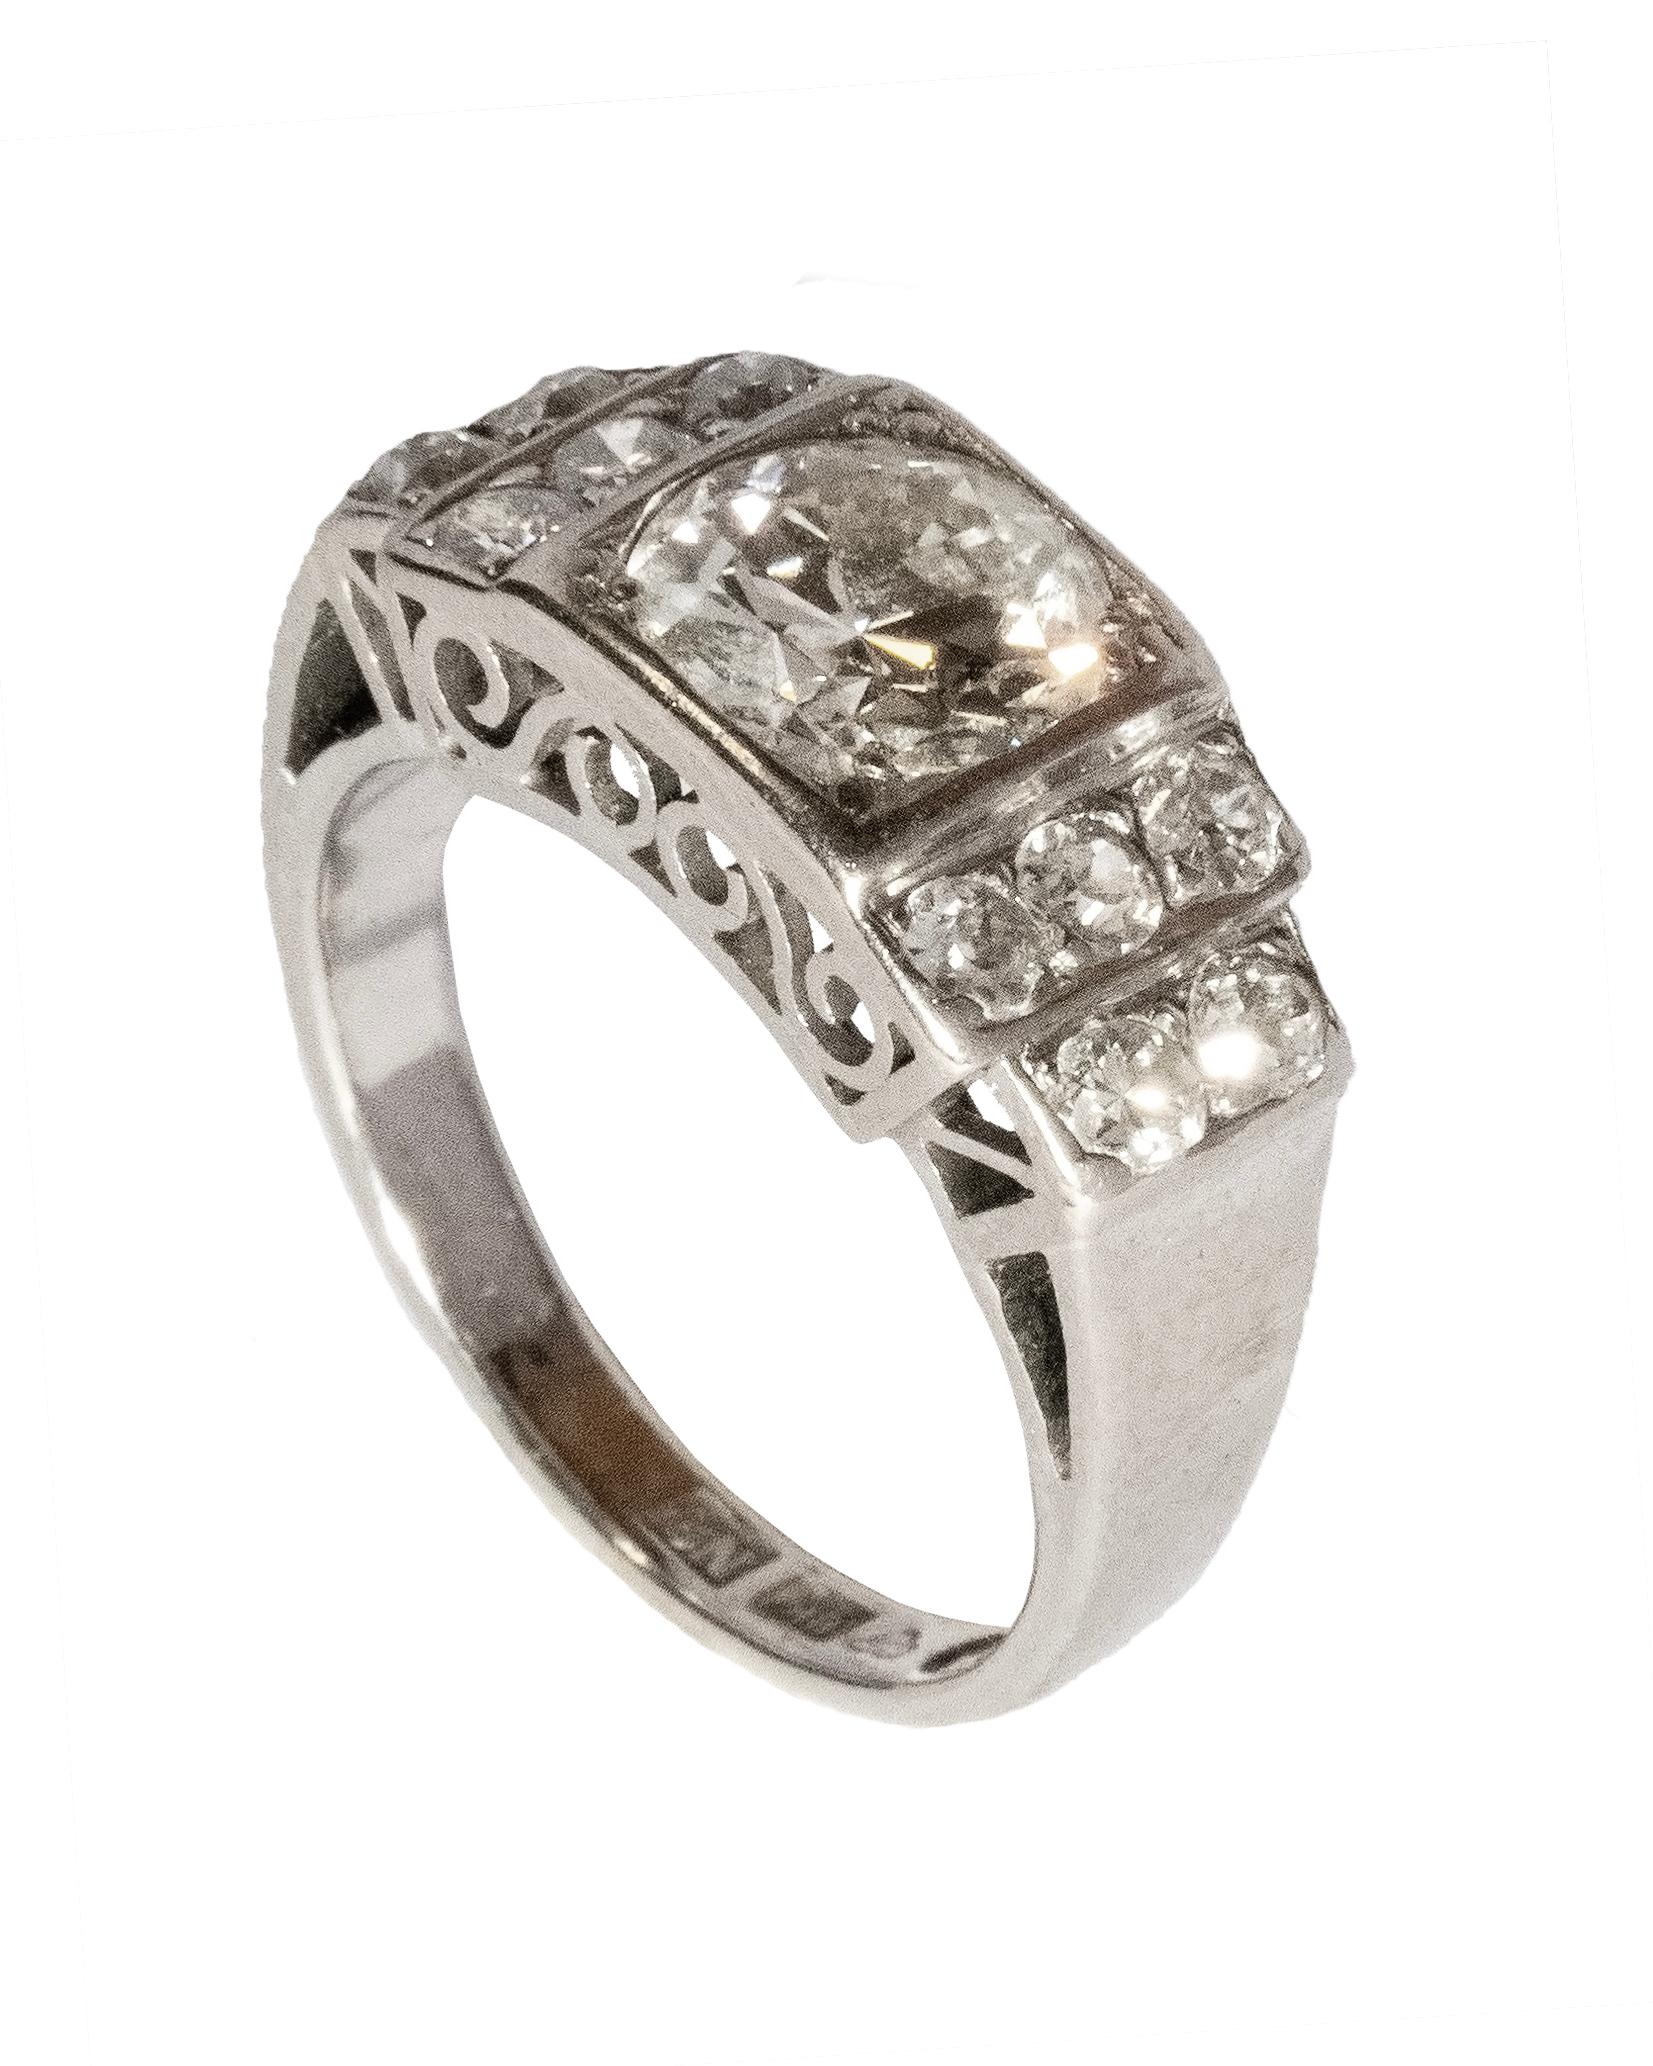 Step into the elegance of Art Deco with this Cocktail Ring, a masterpiece of vintage allure crafted in Sweden in the 1960's. This ring, fashioned from 18k white gold, seamlessly blends the glamour of the Art Deco era with the chic sophistication of